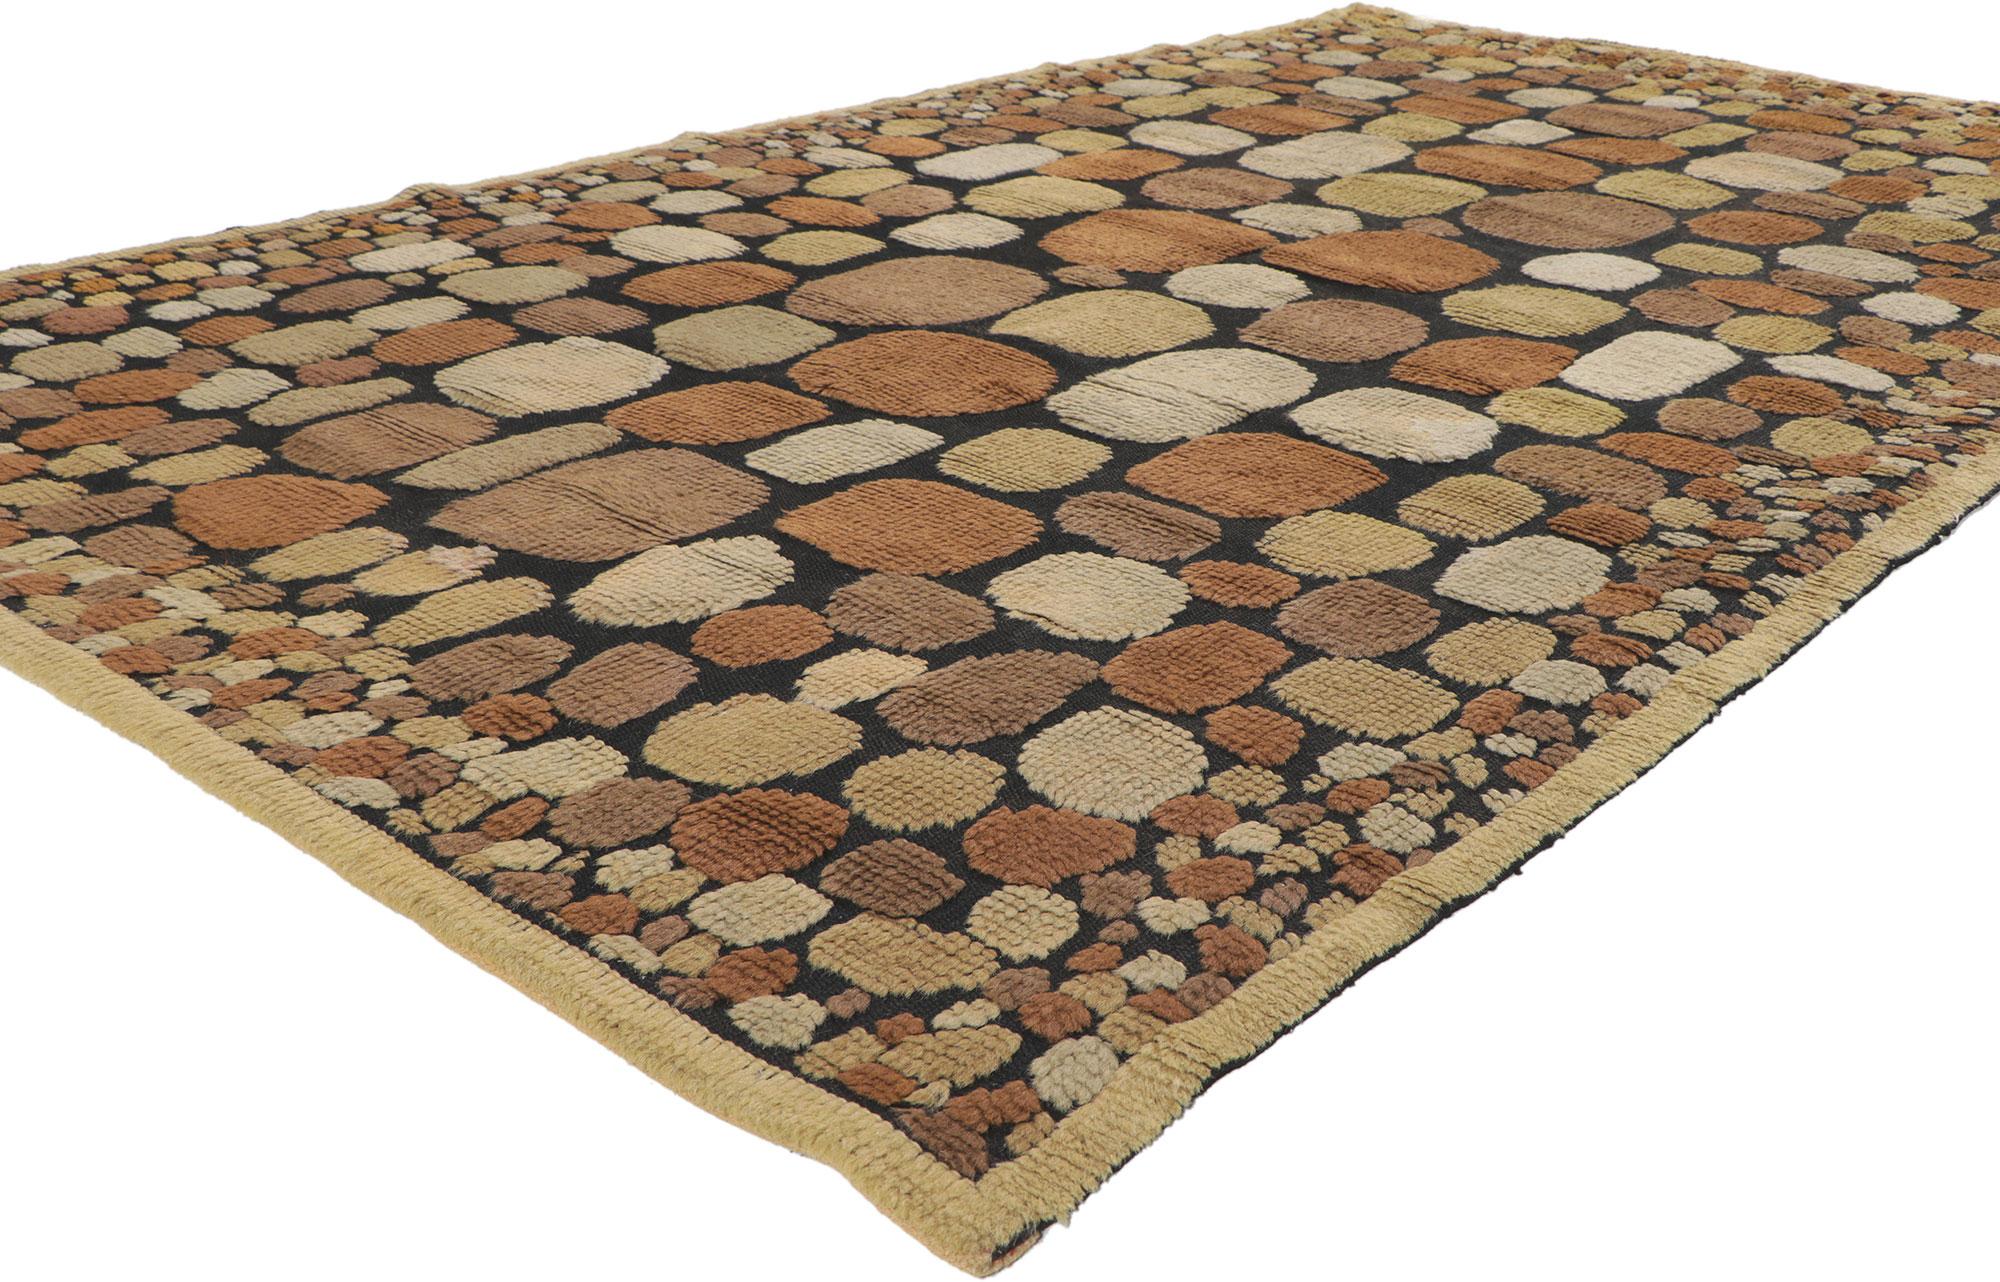 78491 Vintage Swedish Relief Halv-Flossa Rug, 05'02 x 08'09. ?Emanating Biophilic Design with incredible detail and texture, this vintage Swedish relief rug is a captivating vision of woven beauty. The raised design and earthy colorway woven into